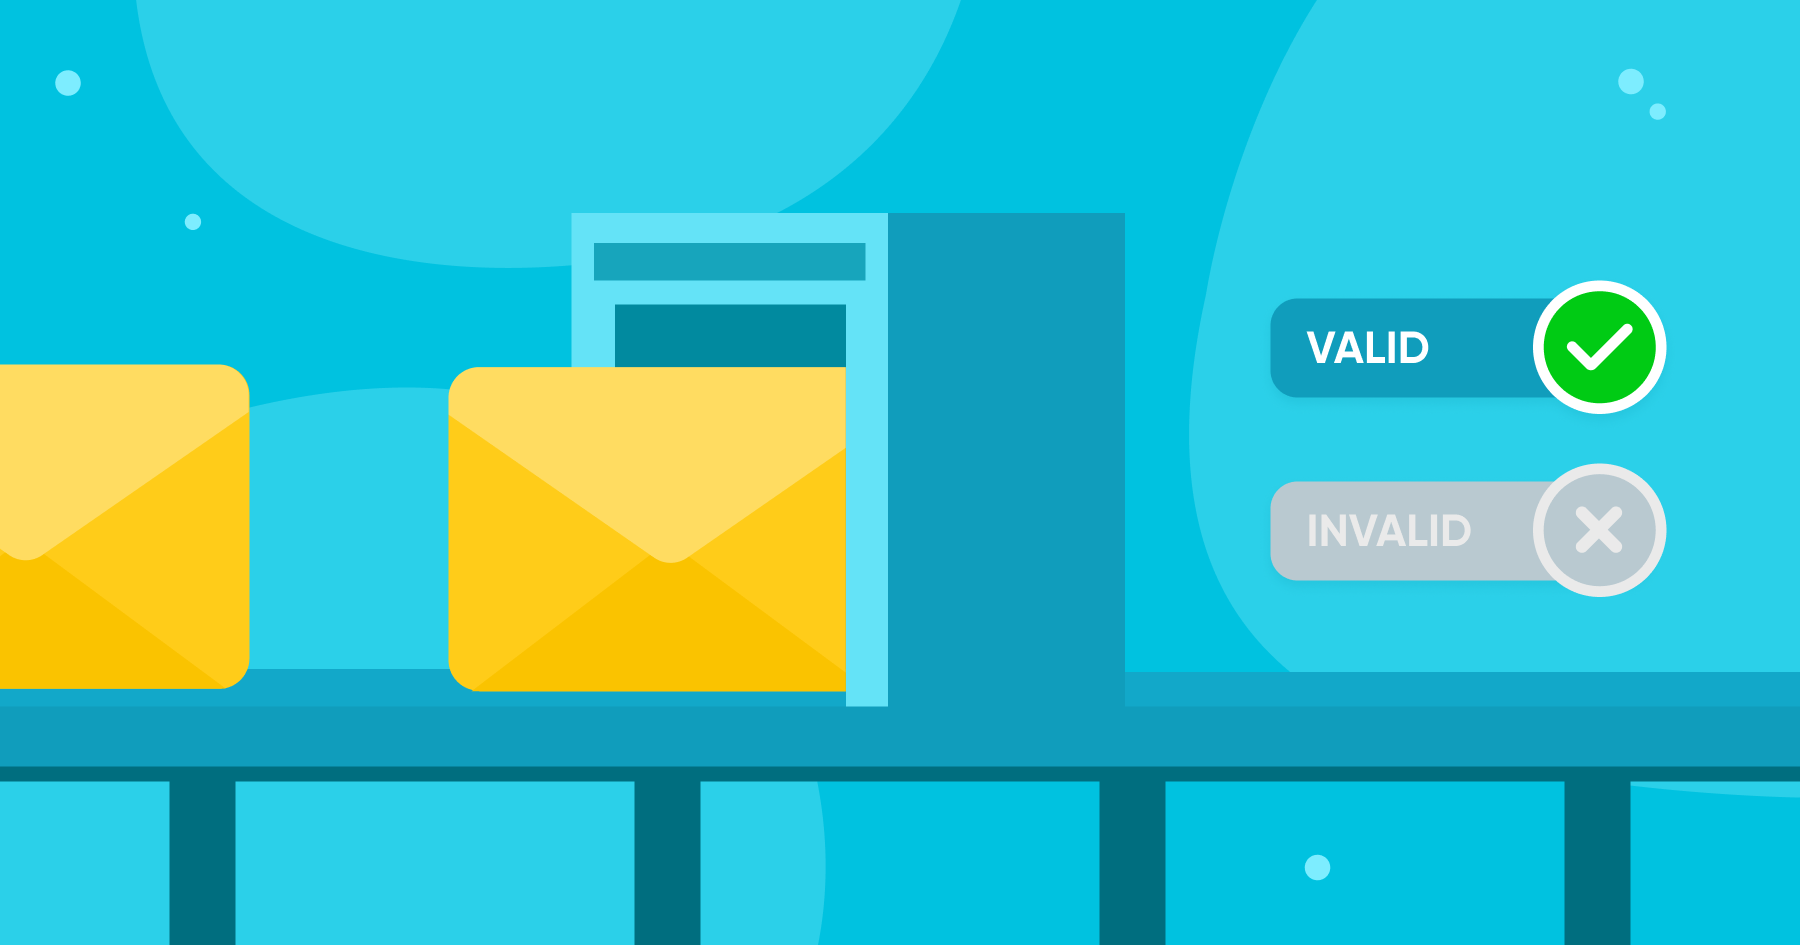 The Complete Guide on How to Check if an Email Address Is Valid